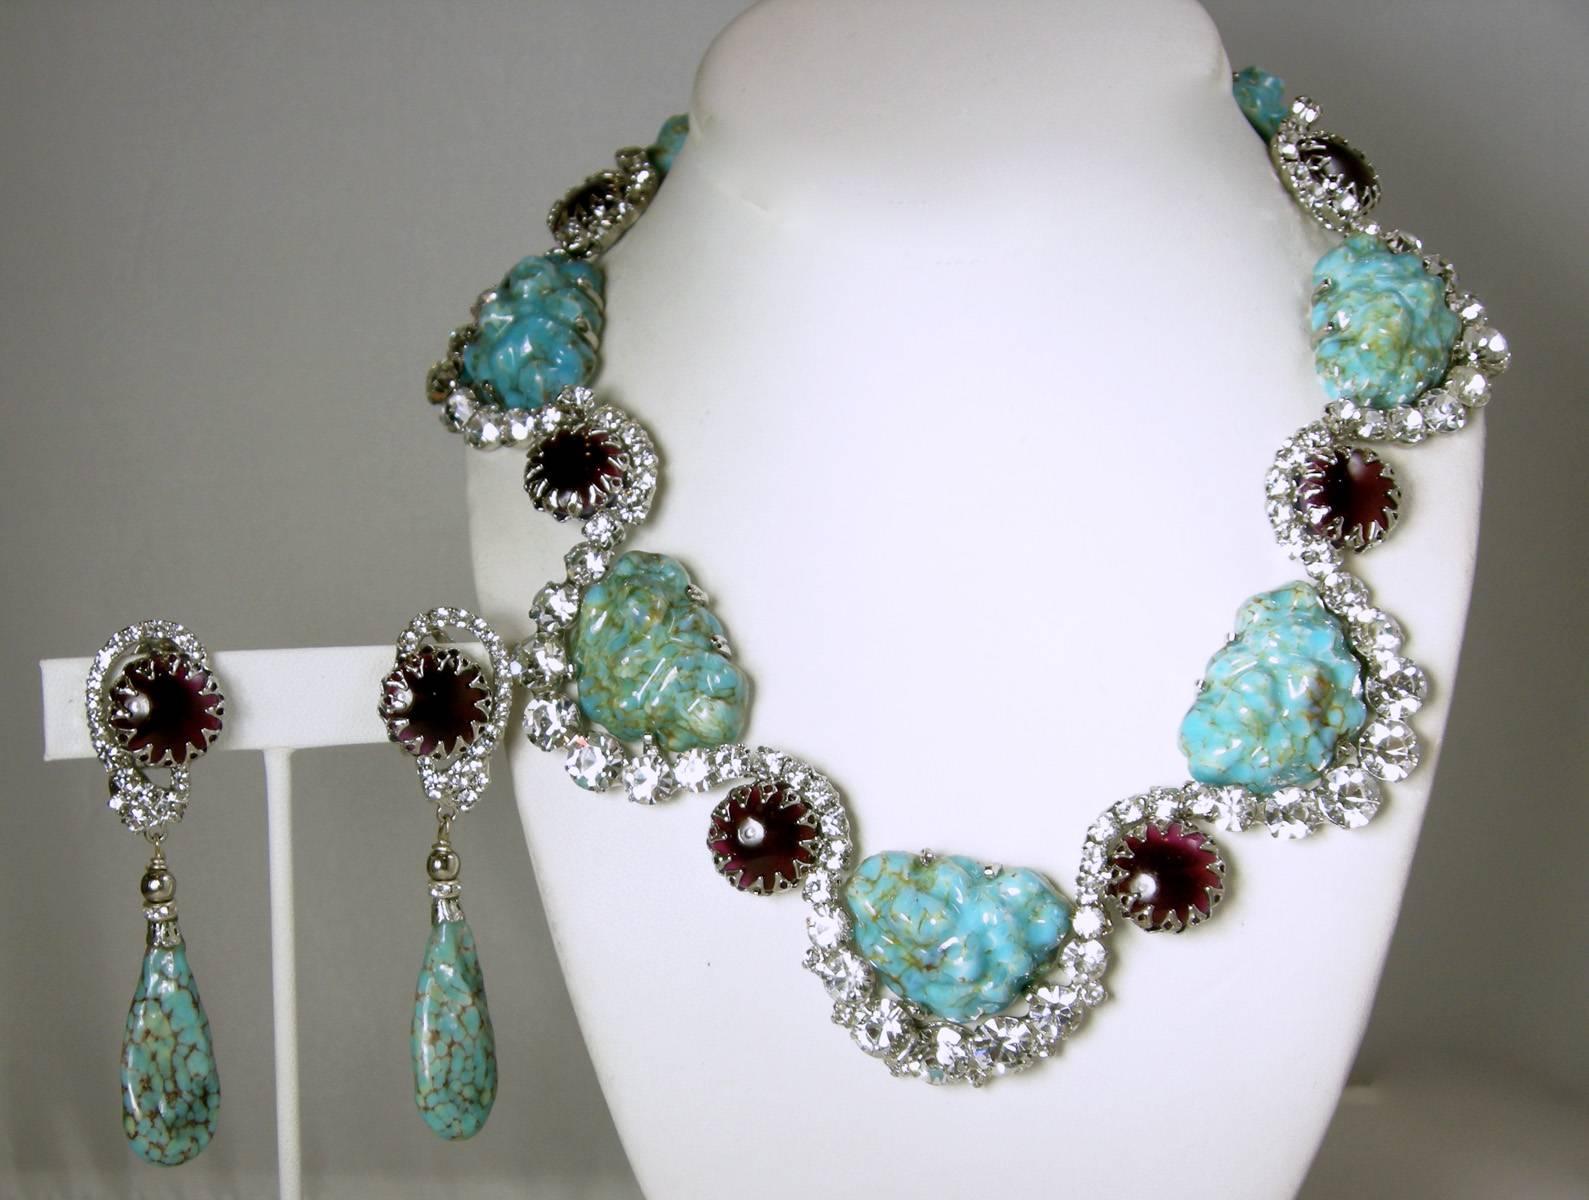 Women's Robert Sorrell “One Of A Kind” Faux Turquoise Scallop Necklace Set